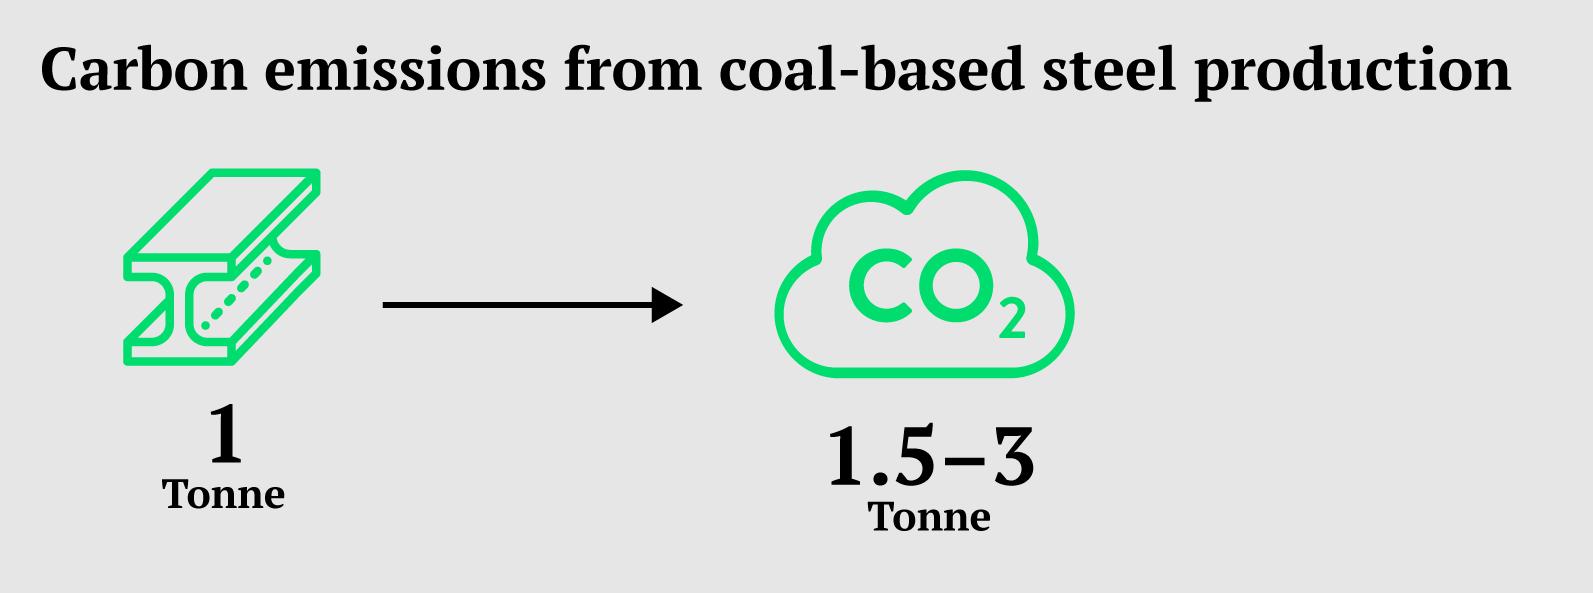 https://www.industrytransition.org/content/uploads/2021/06/steel-and-carbon.png